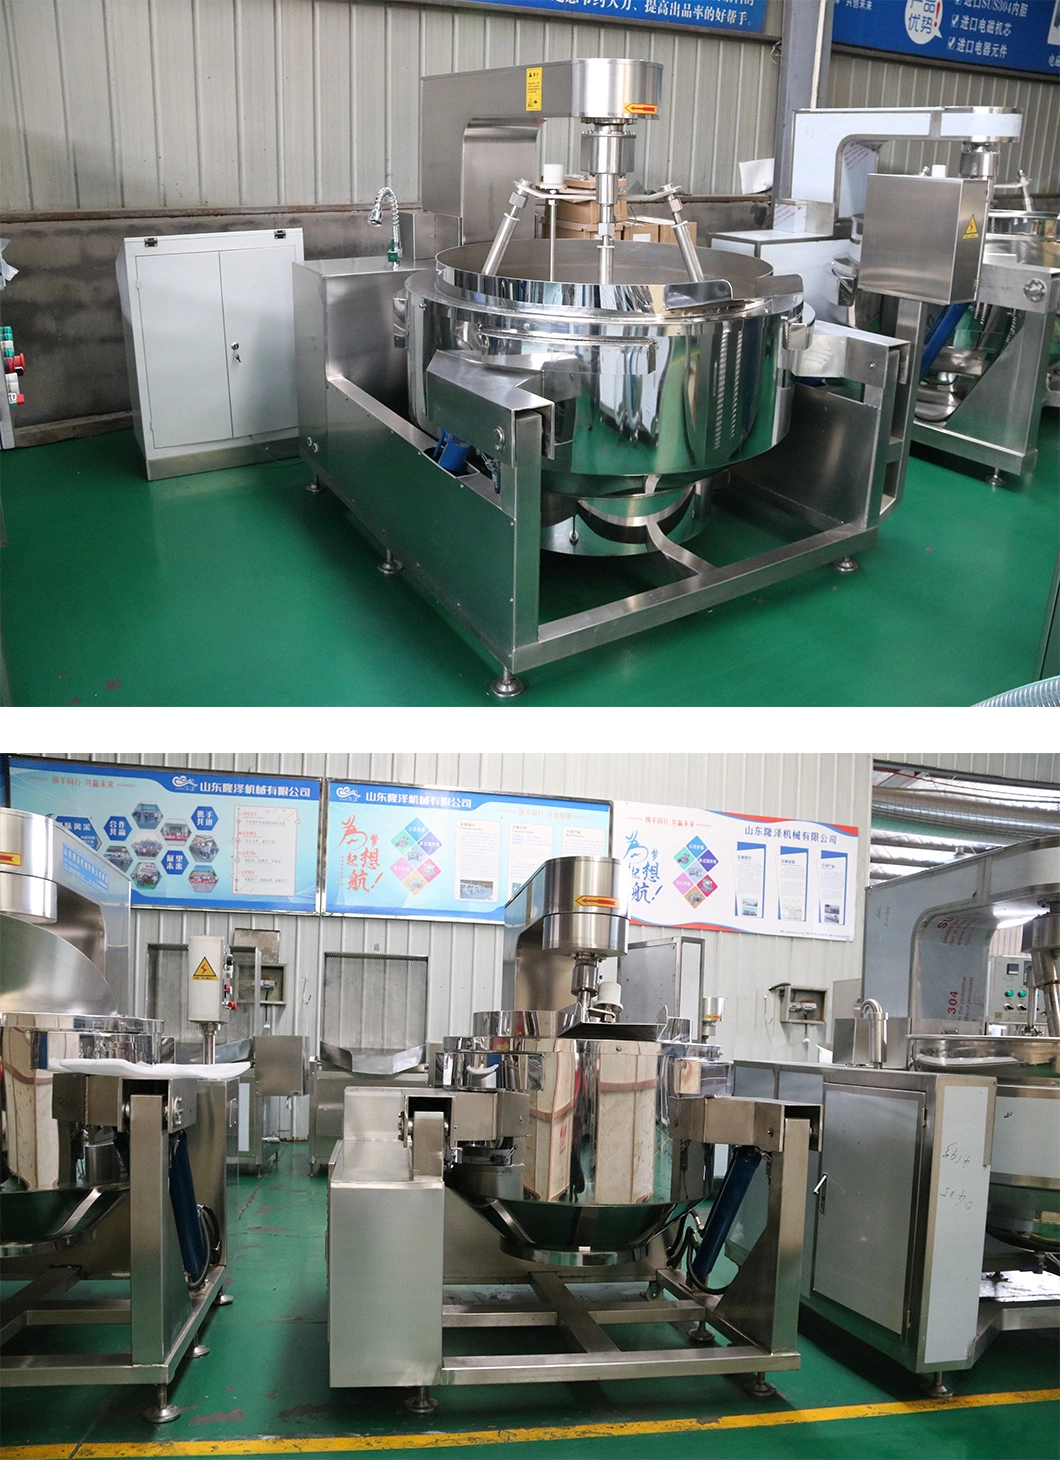 China Big Industrial Commercial Automatic Multi Planetary Tilting Curry Chili Bean Paste Mixing Making Electric Gas Steam Kecap Manis Sauce Cooking Wok